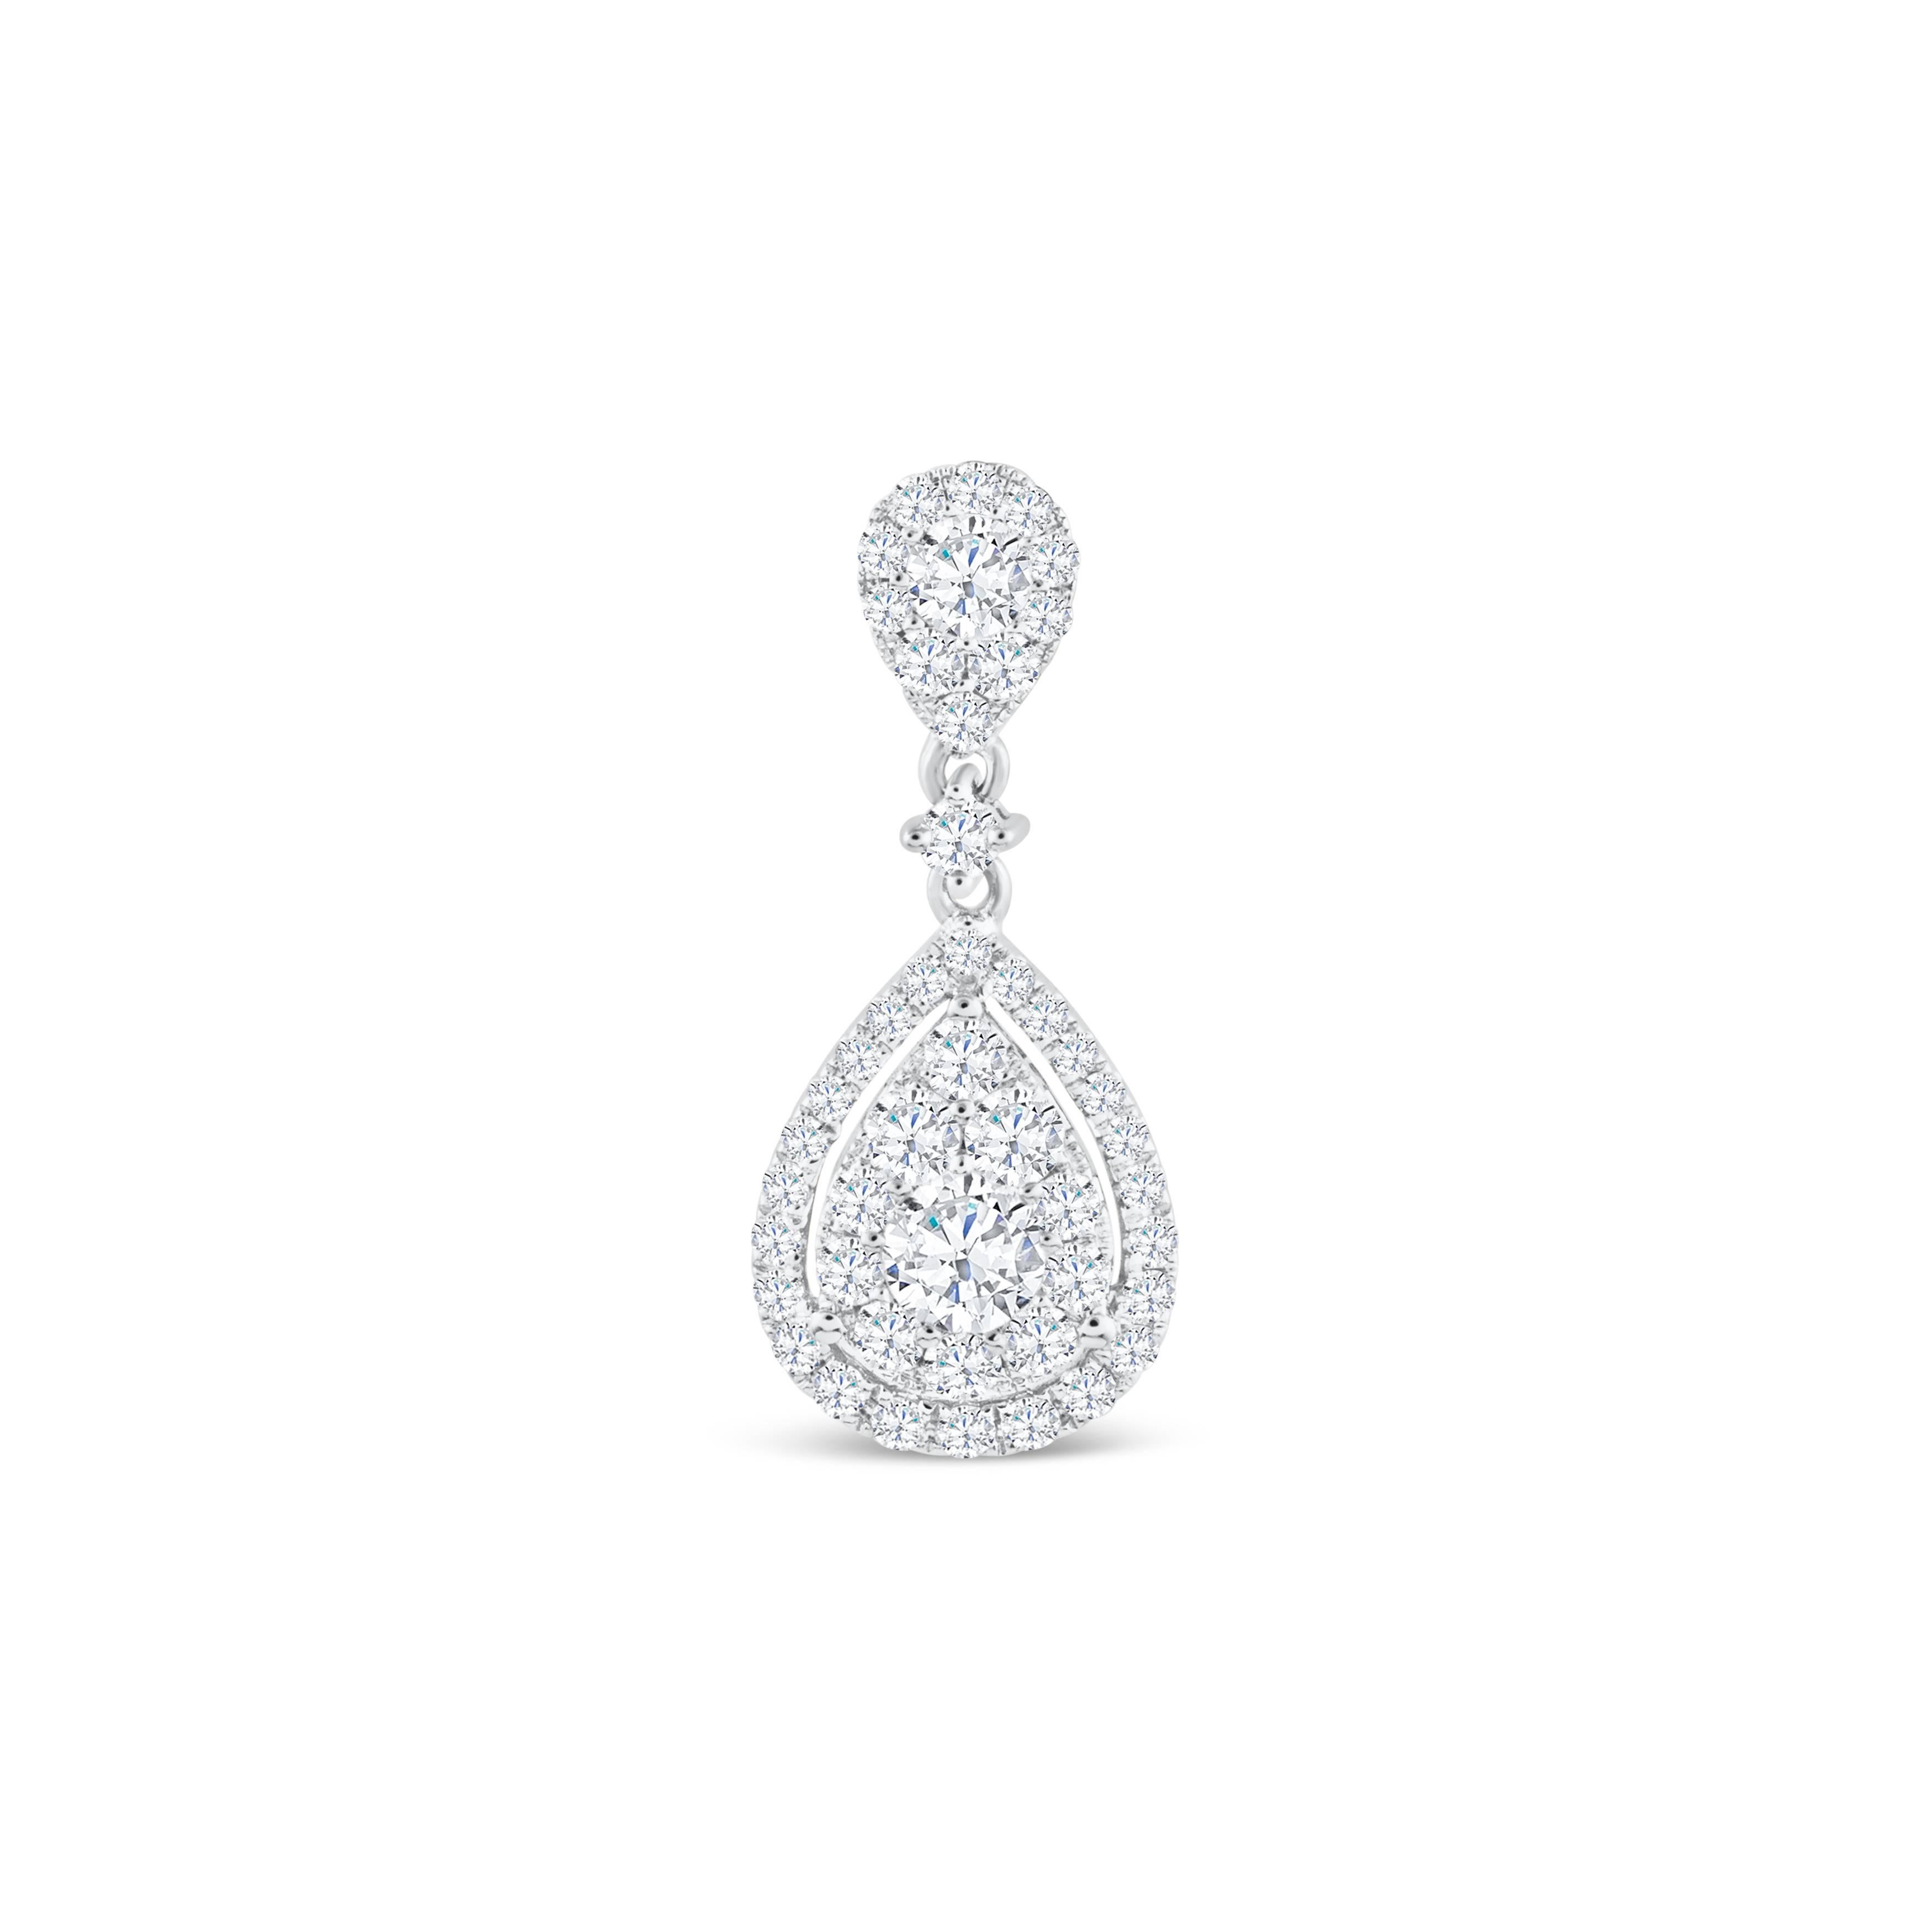 An elegant pair of earrings showcasing a cluster of round brilliant diamonds weighing 1.97 carats total, set in an illusion dangle design. Surrounded by a double row of round melee diamond. made in 18K White Gold.

Style available in different price